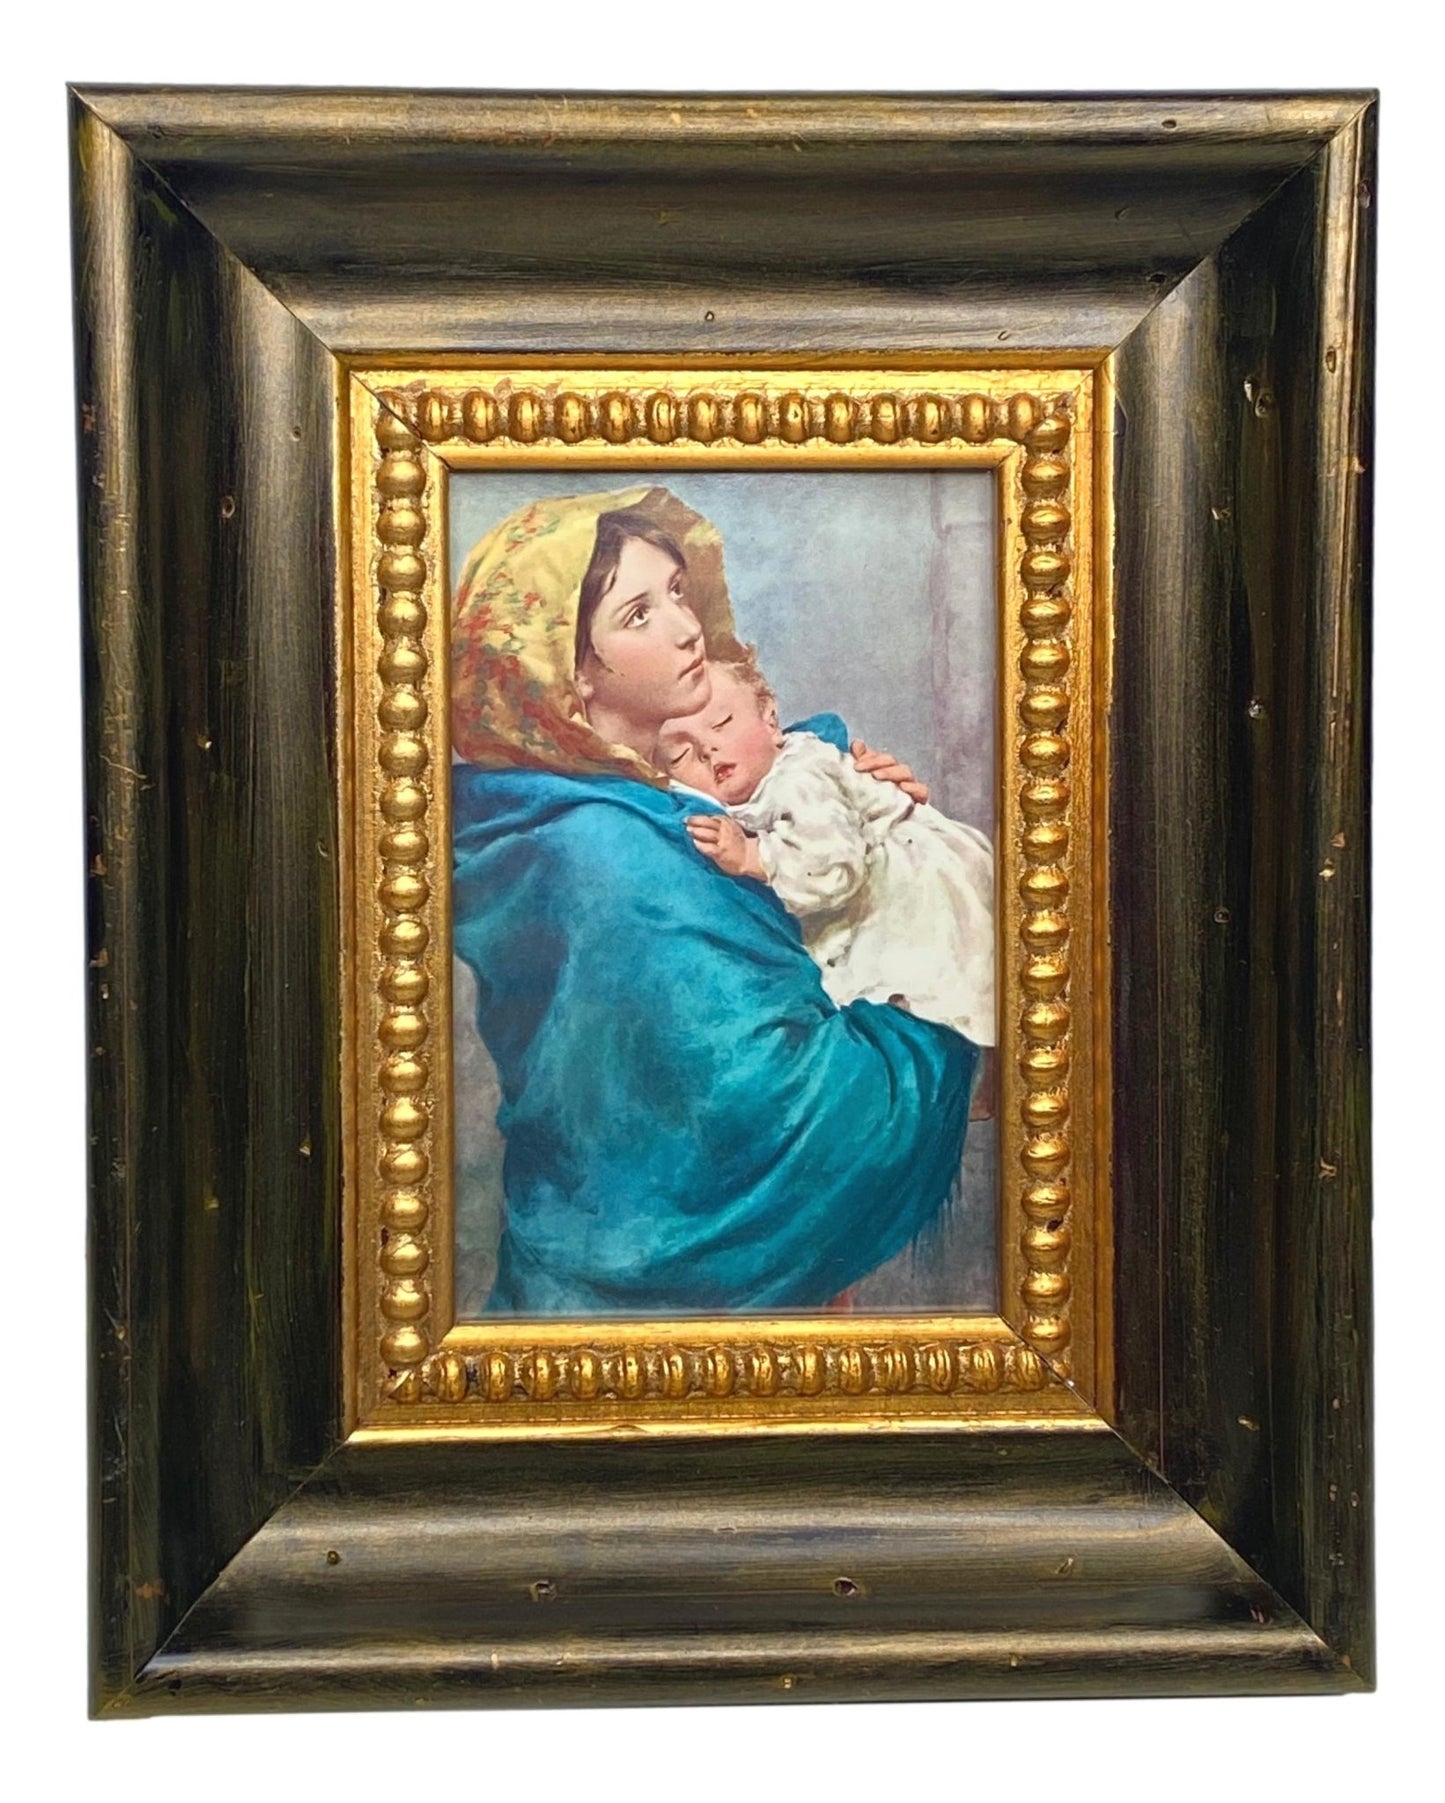 Frame Wood Vintage Madonna Sleeping Child Image Handcrafted by Local Artist Norma 8 L x 1 1/2 W x 10 H Inches - Ysleta Mission Gift Shop- VOTED 2022 El Paso's Best Gift Shop